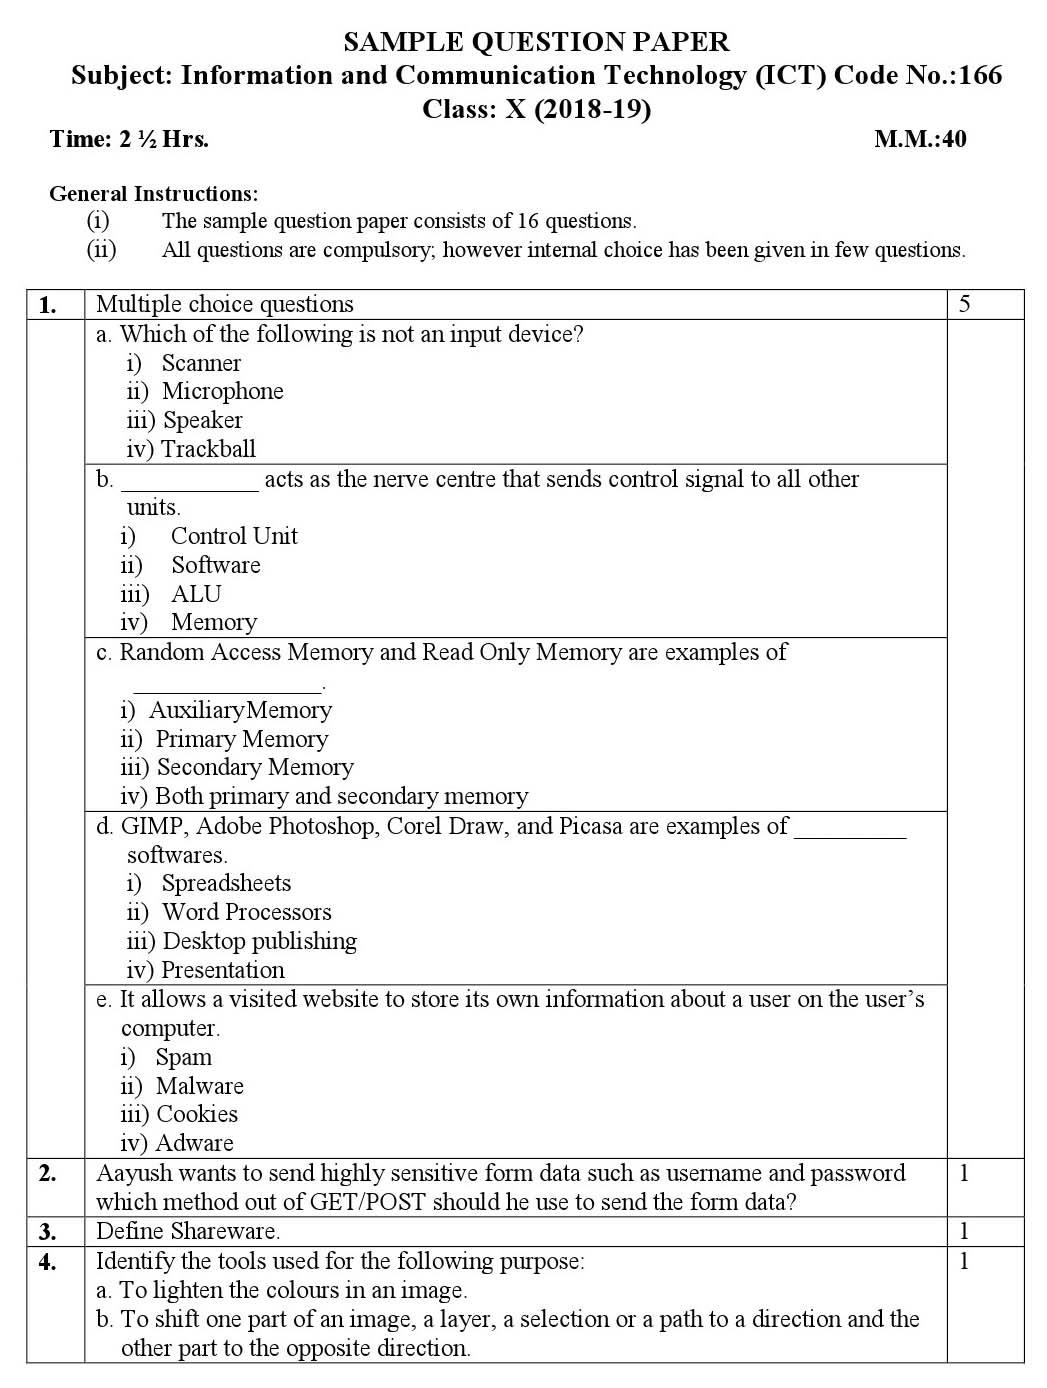 Information and Communication Technology CBSE Class X Sample Question Paper 2018 19 - Image 1